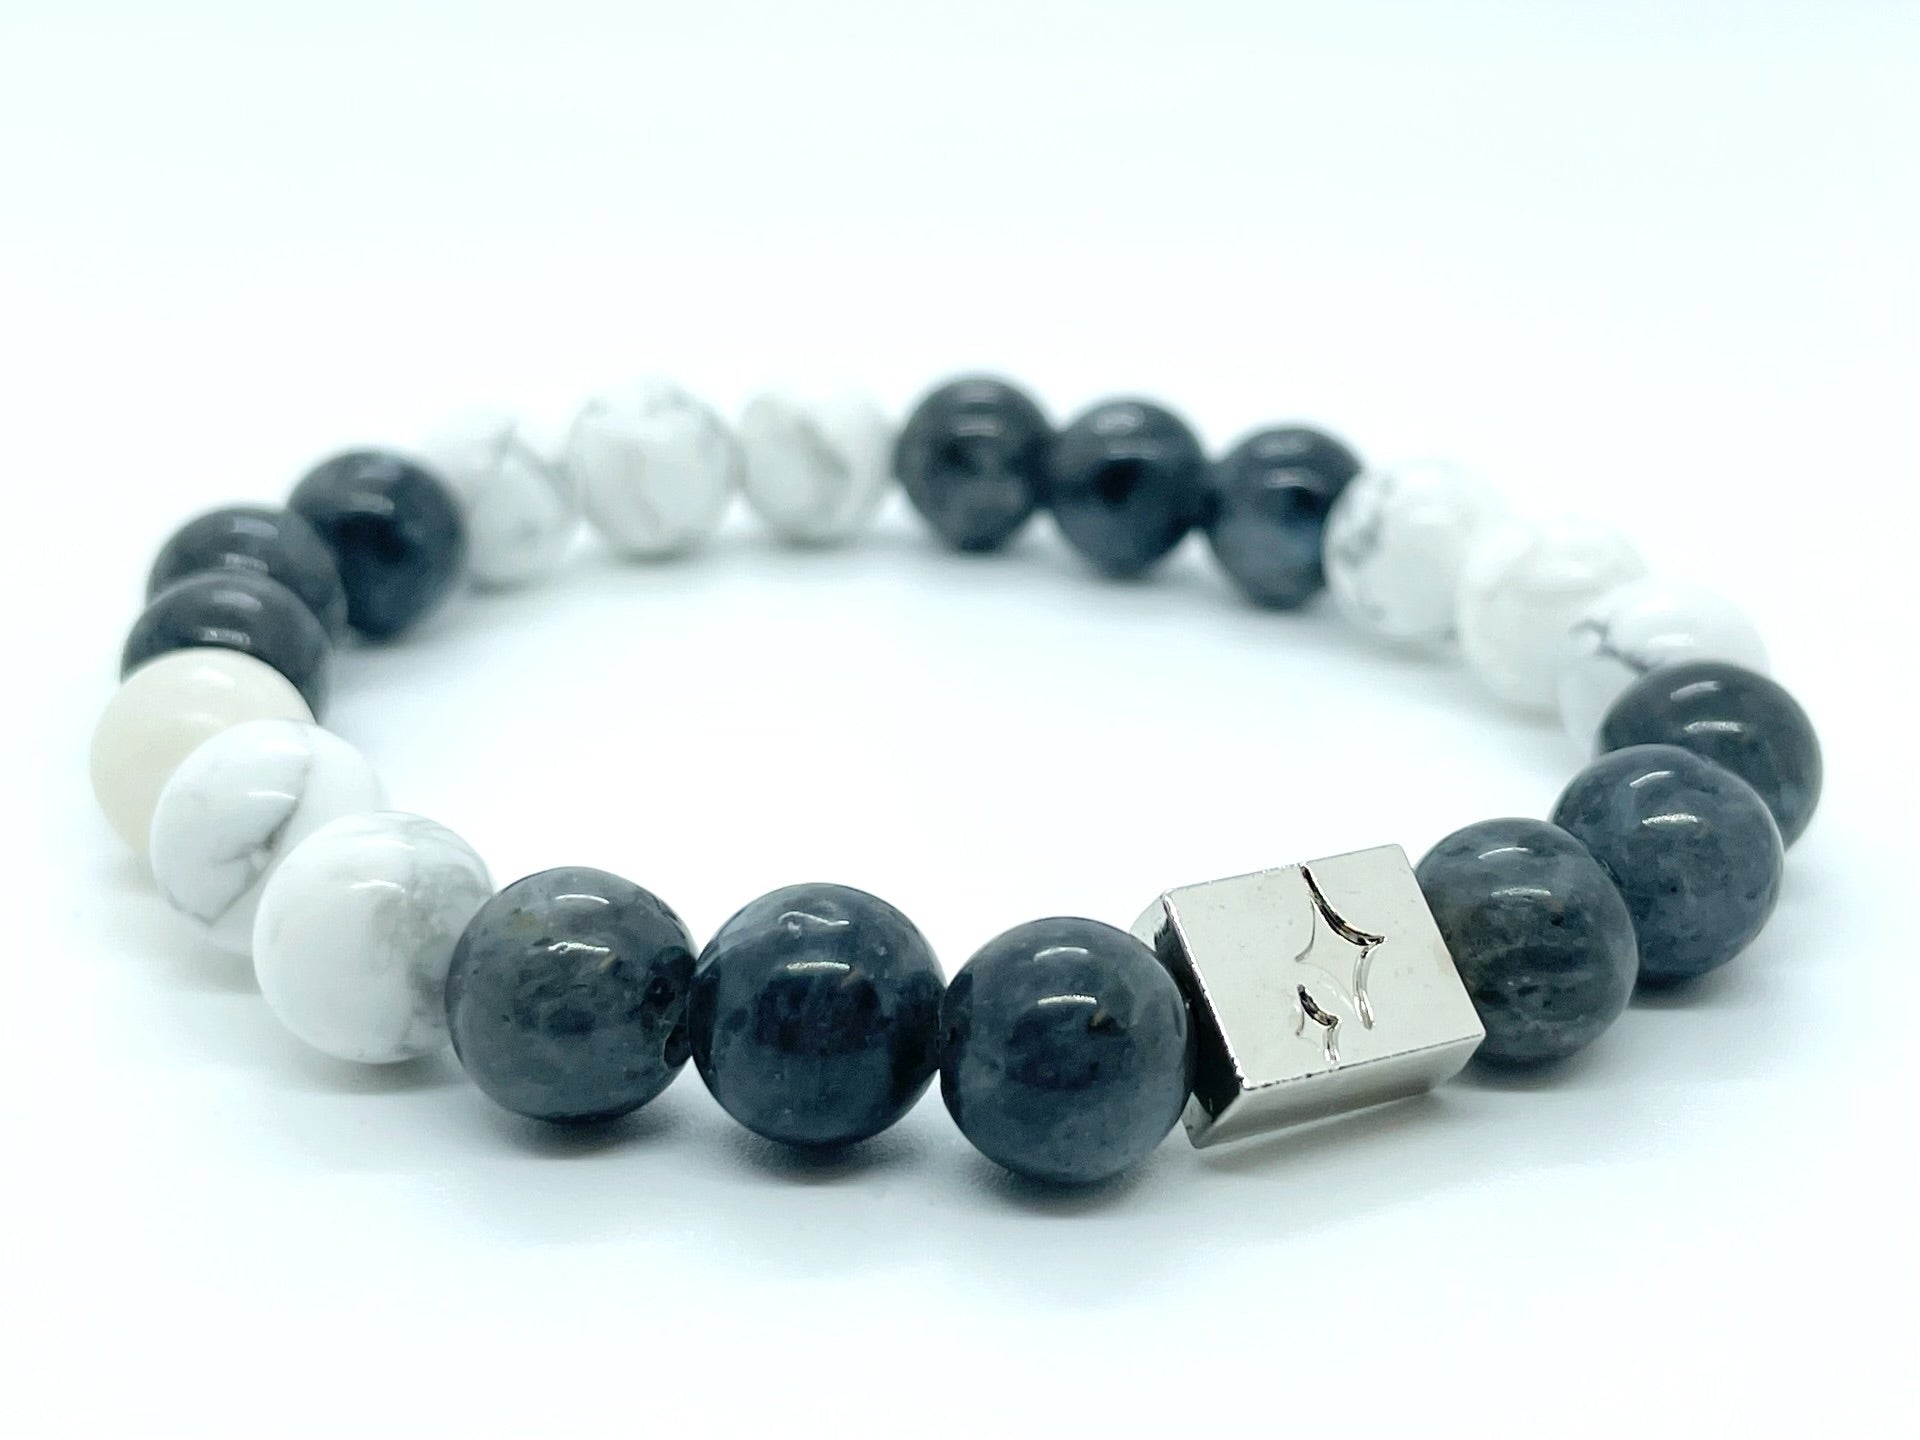 Project TEAM Grey and White Patterned Bracelet